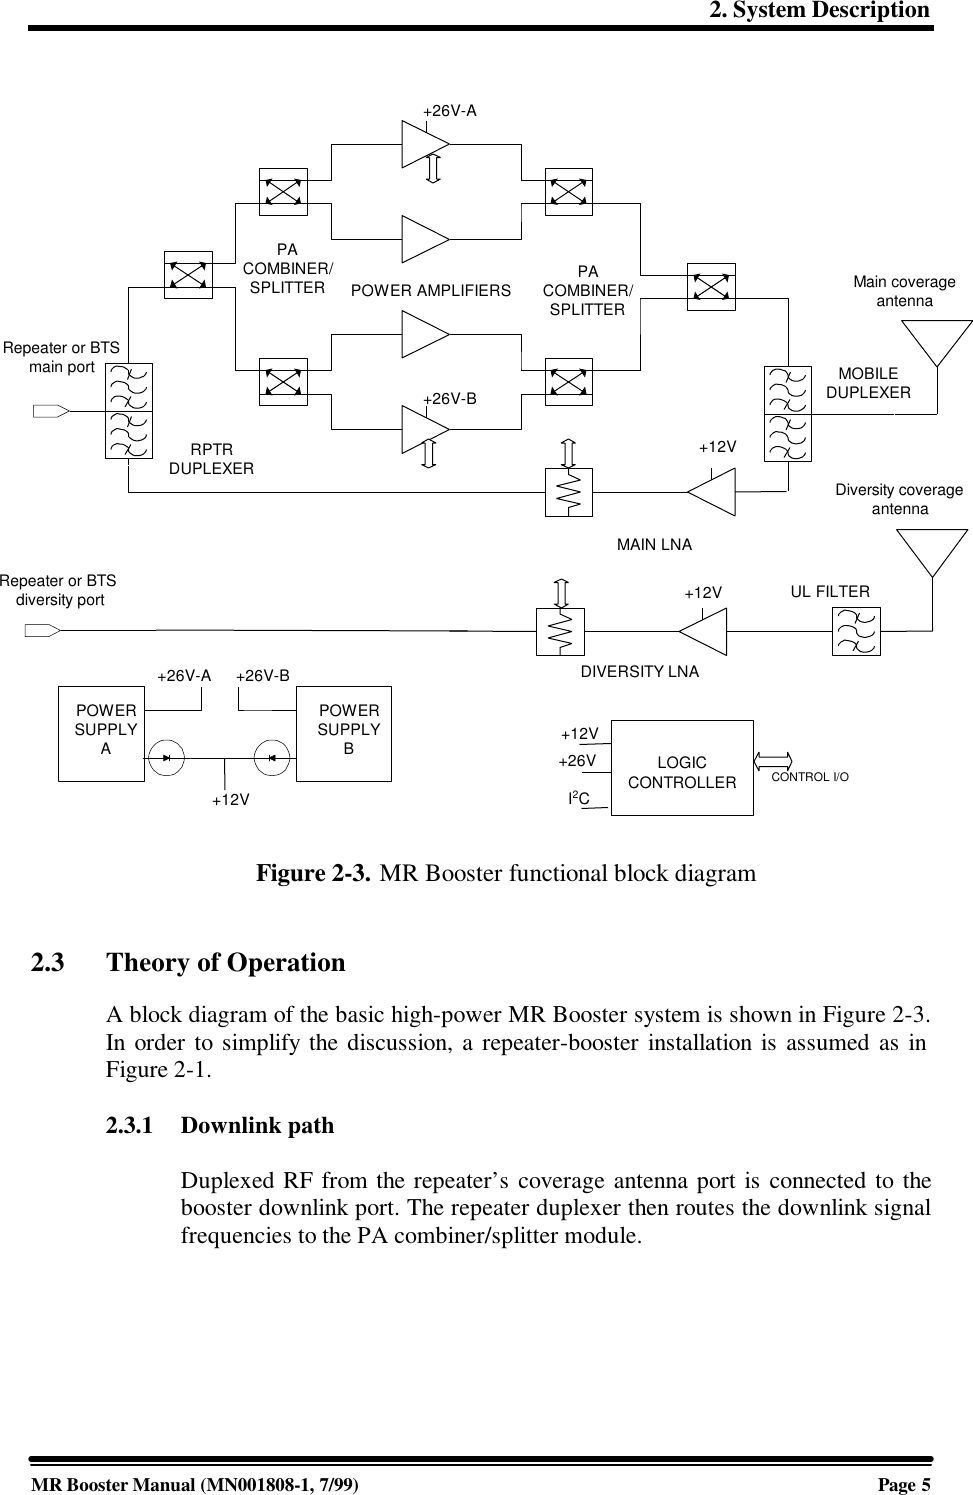 2. System DescriptionMR Booster Manual (MN001808-1, 7/99)Page 5Figure 2-3. MR Booster functional block diagram2.3 Theory of OperationA block diagram of the basic high-power MR Booster system is shown in Figure 2-3.In order to simplify the discussion, a repeater-booster installation is assumed as inFigure 2-1.2.3.1 Downlink pathDuplexed RF from the repeater’s coverage antenna port is connected to thebooster downlink port. The repeater duplexer then routes the downlink signalfrequencies to the PA combiner/splitter module.POWERSUPPLYAPOWERSUPPLYB+12V+26V-A +26V-B+12V+12V+26V-A+26V-BLOGICCONTROLLER+12VI2CCONTROL I/ORepeater or BTSmain portRepeater or BTS diversity port+26VMAIN LNADIVERSITY LNAPOWER AMPLIFIERSRPTRDUPLEXERMOBILEDUPLEXERUL FILTERPACOMBINER/SPLITTER PACOMBINER/SPLITTERMain coverageantennaDiversity coverageantenna